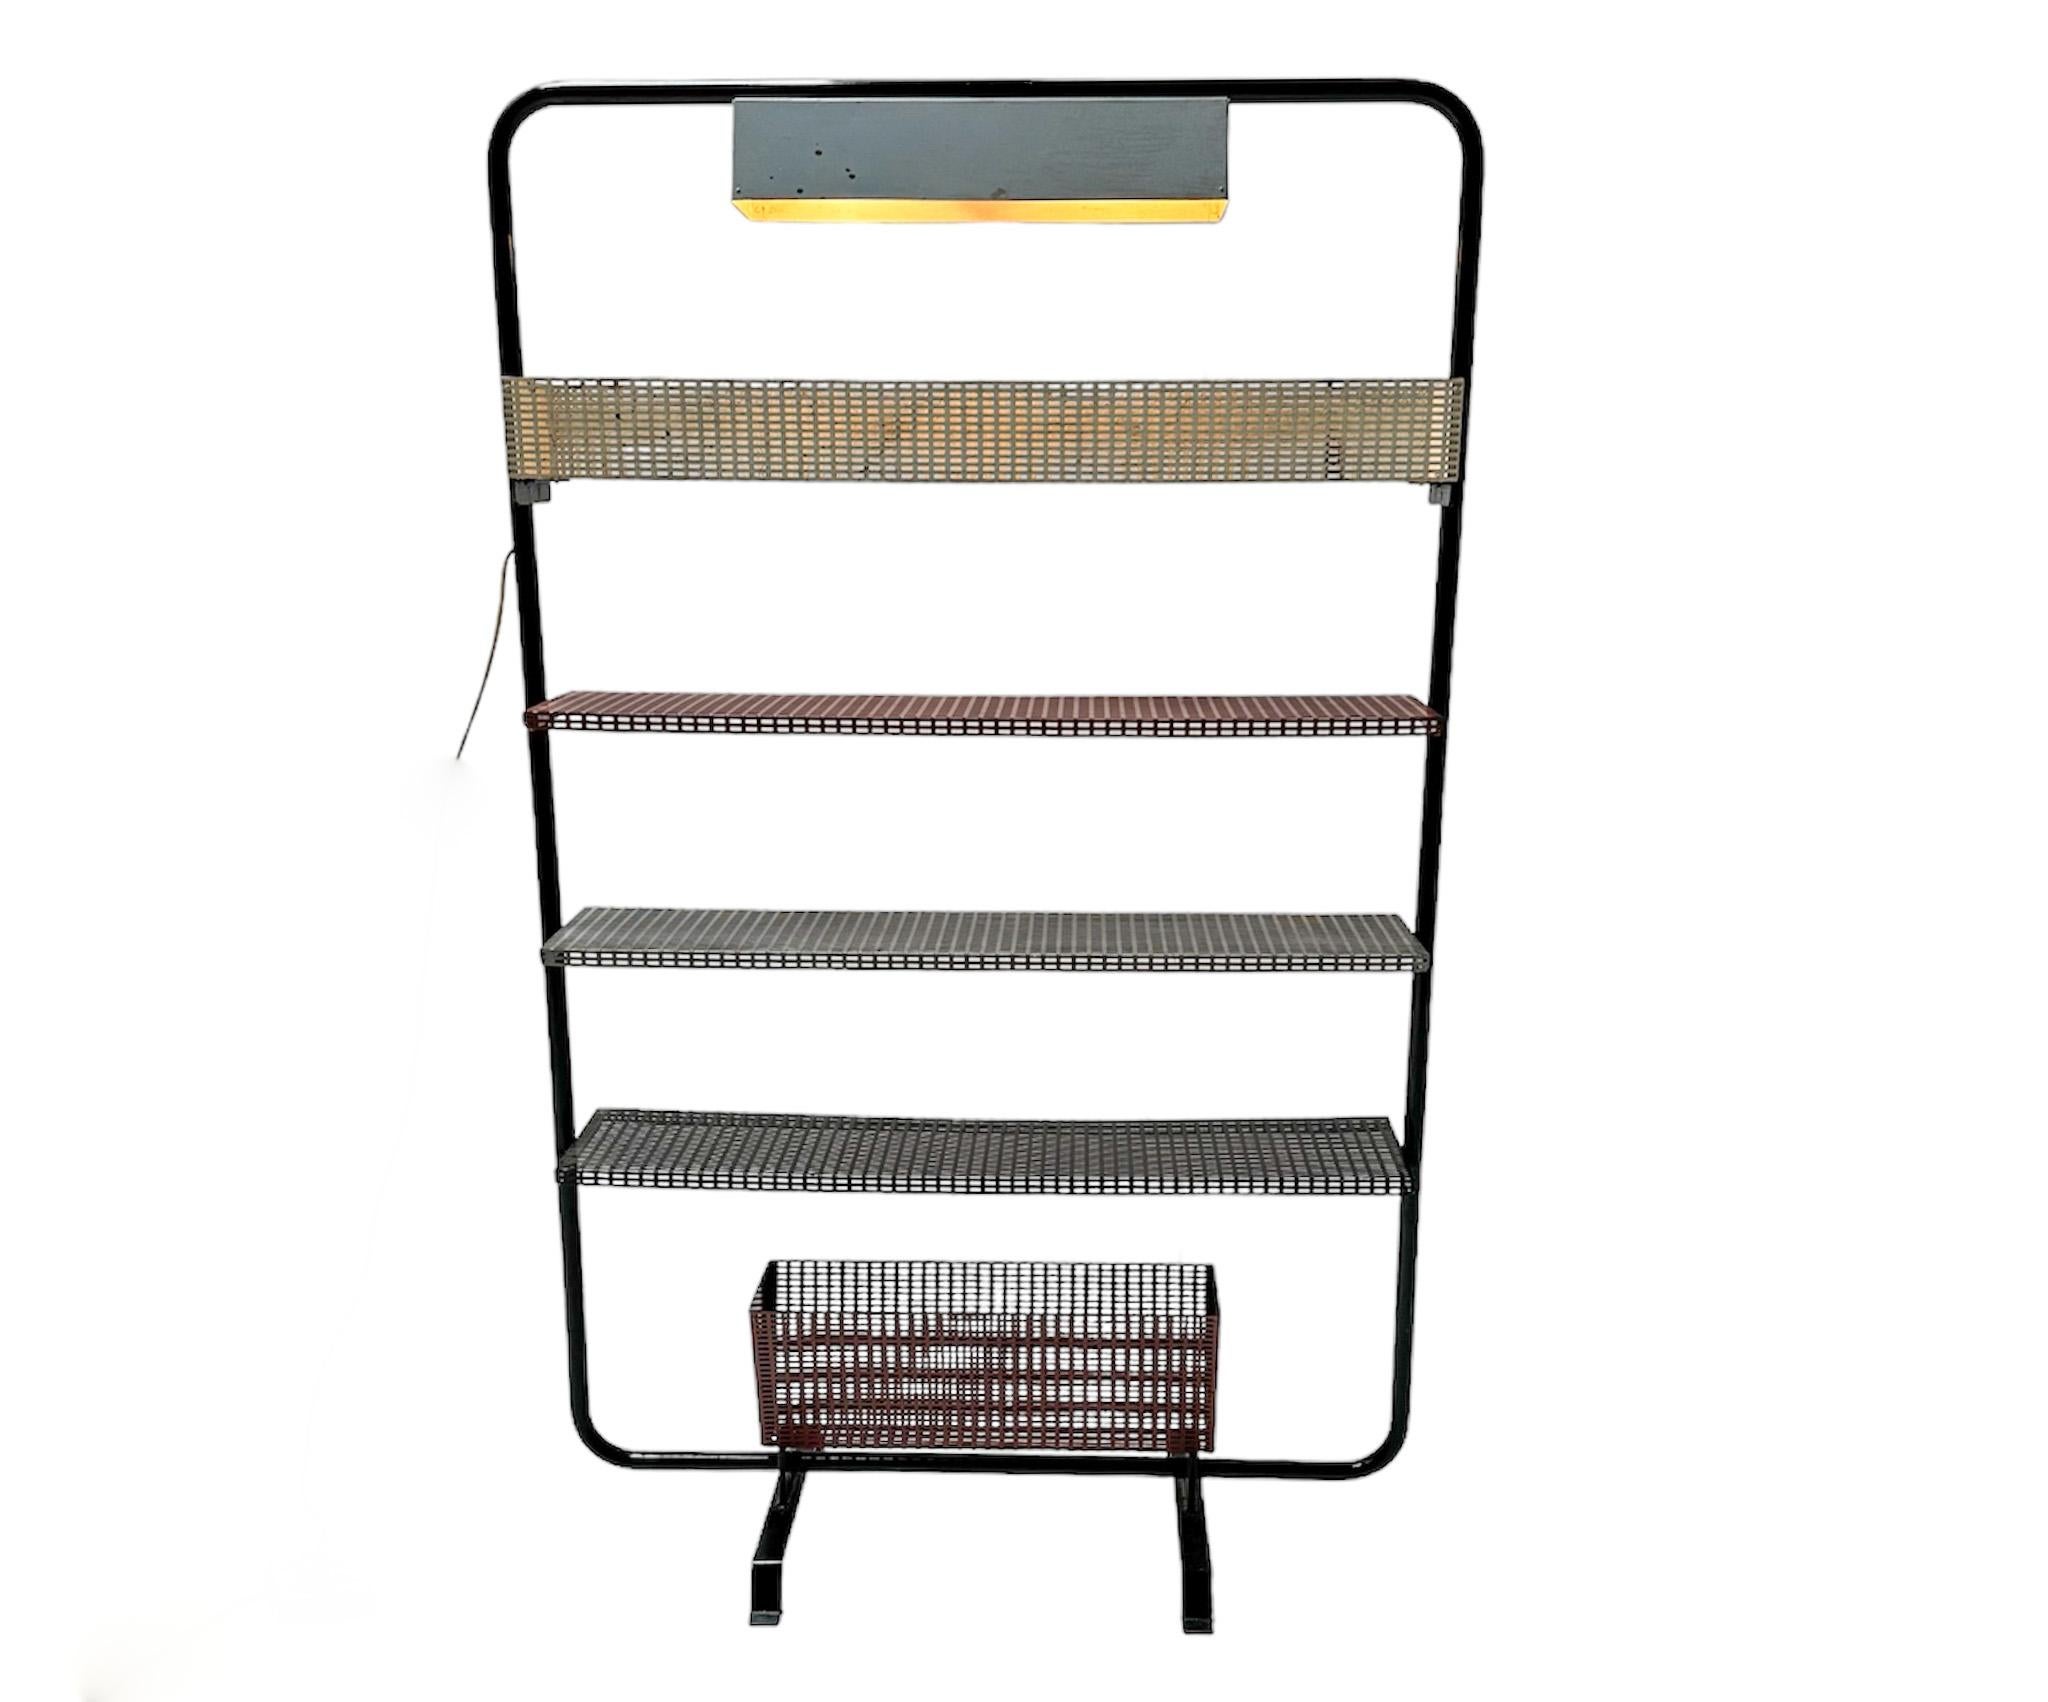 Stunning and elegant Mid-Century Modern wall unit or room divider.
Striking French design from the 1960s.
Original black lacquered metal frame with original multi-colored sheet metal shelves and  original lighting.
This wonderful Mid-Century Modern